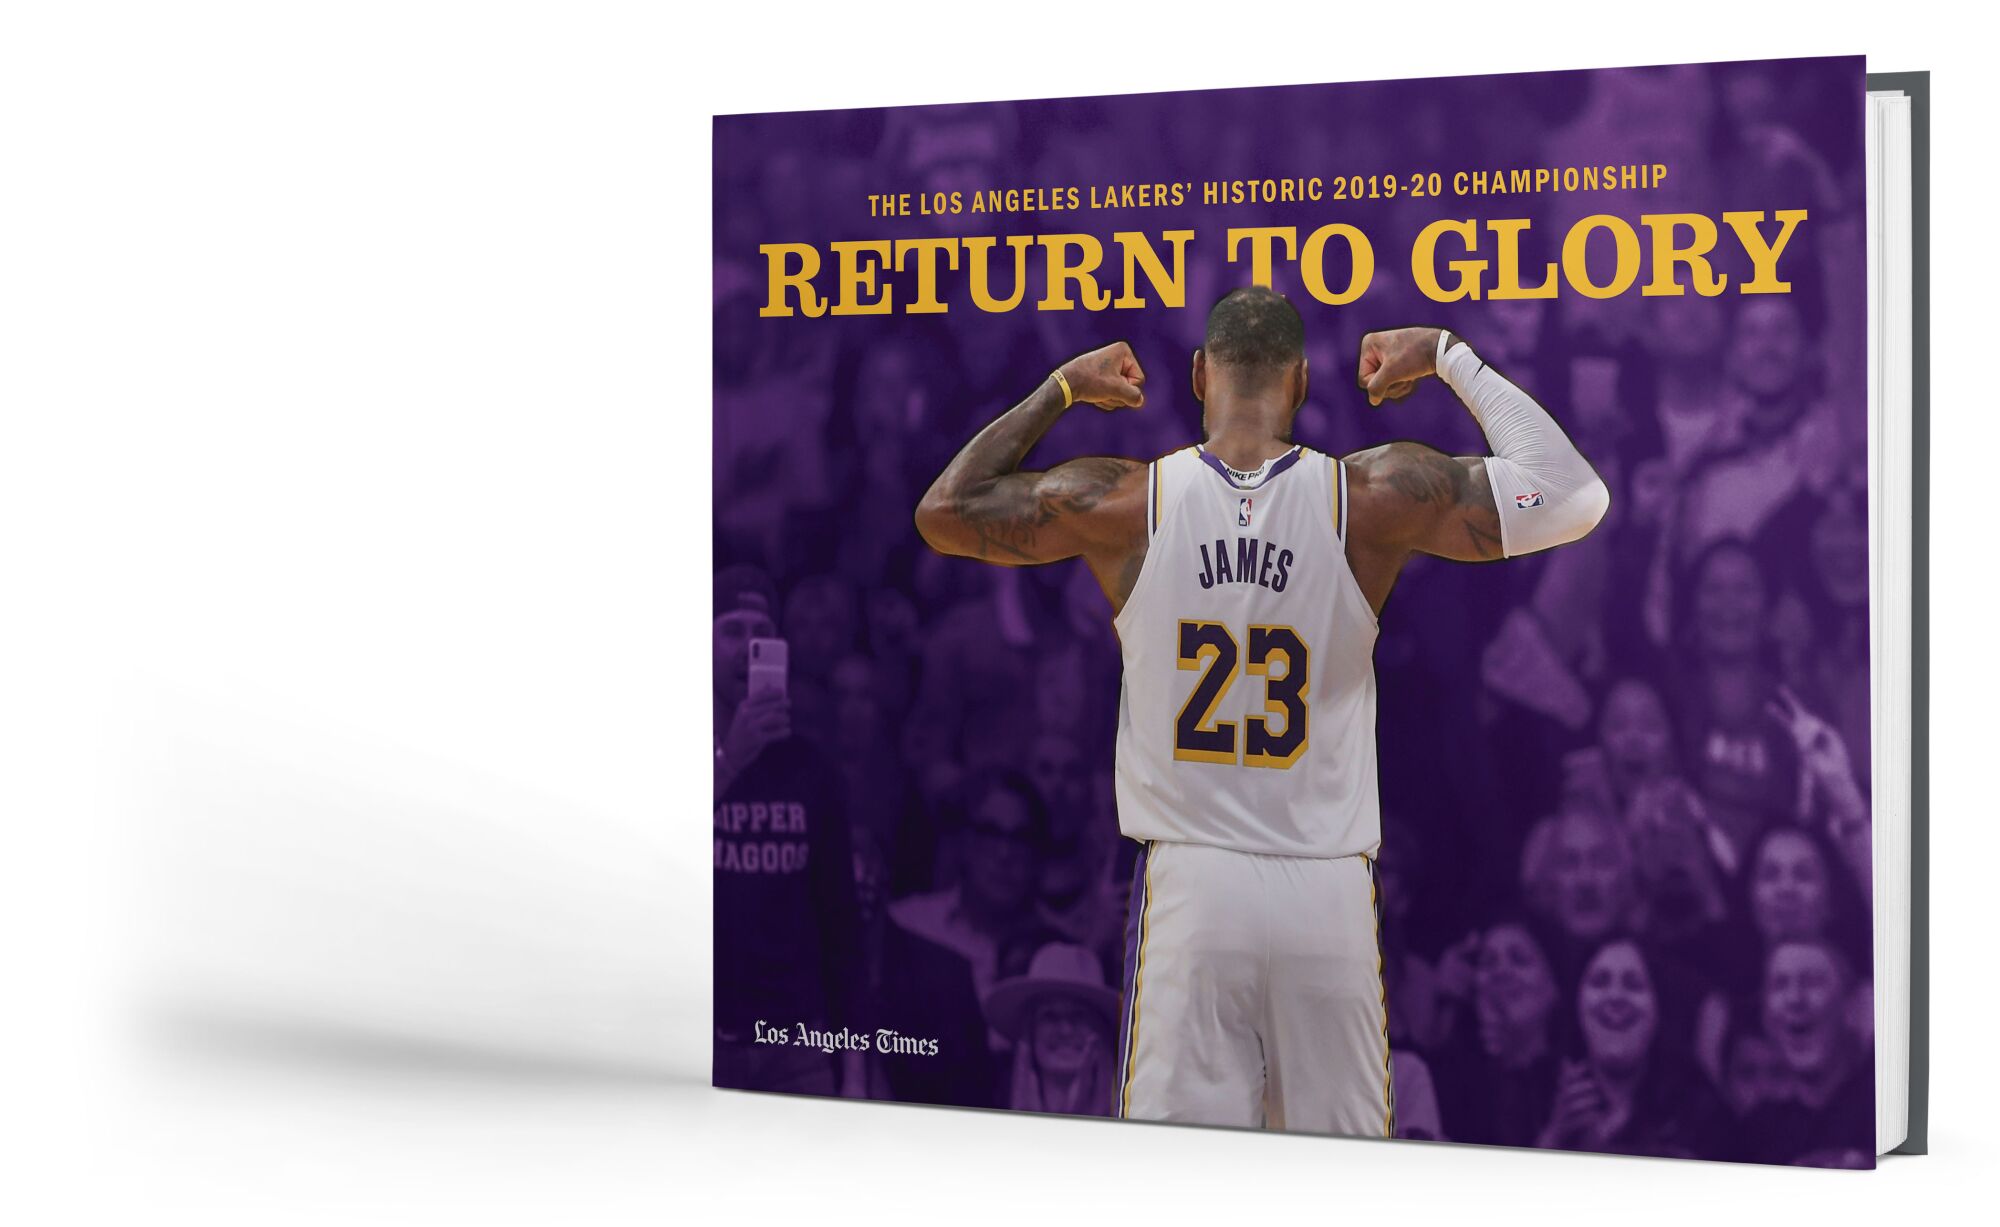 "Return to Glory" chronicles the Lakers' championship run during the historic 2019-20 season